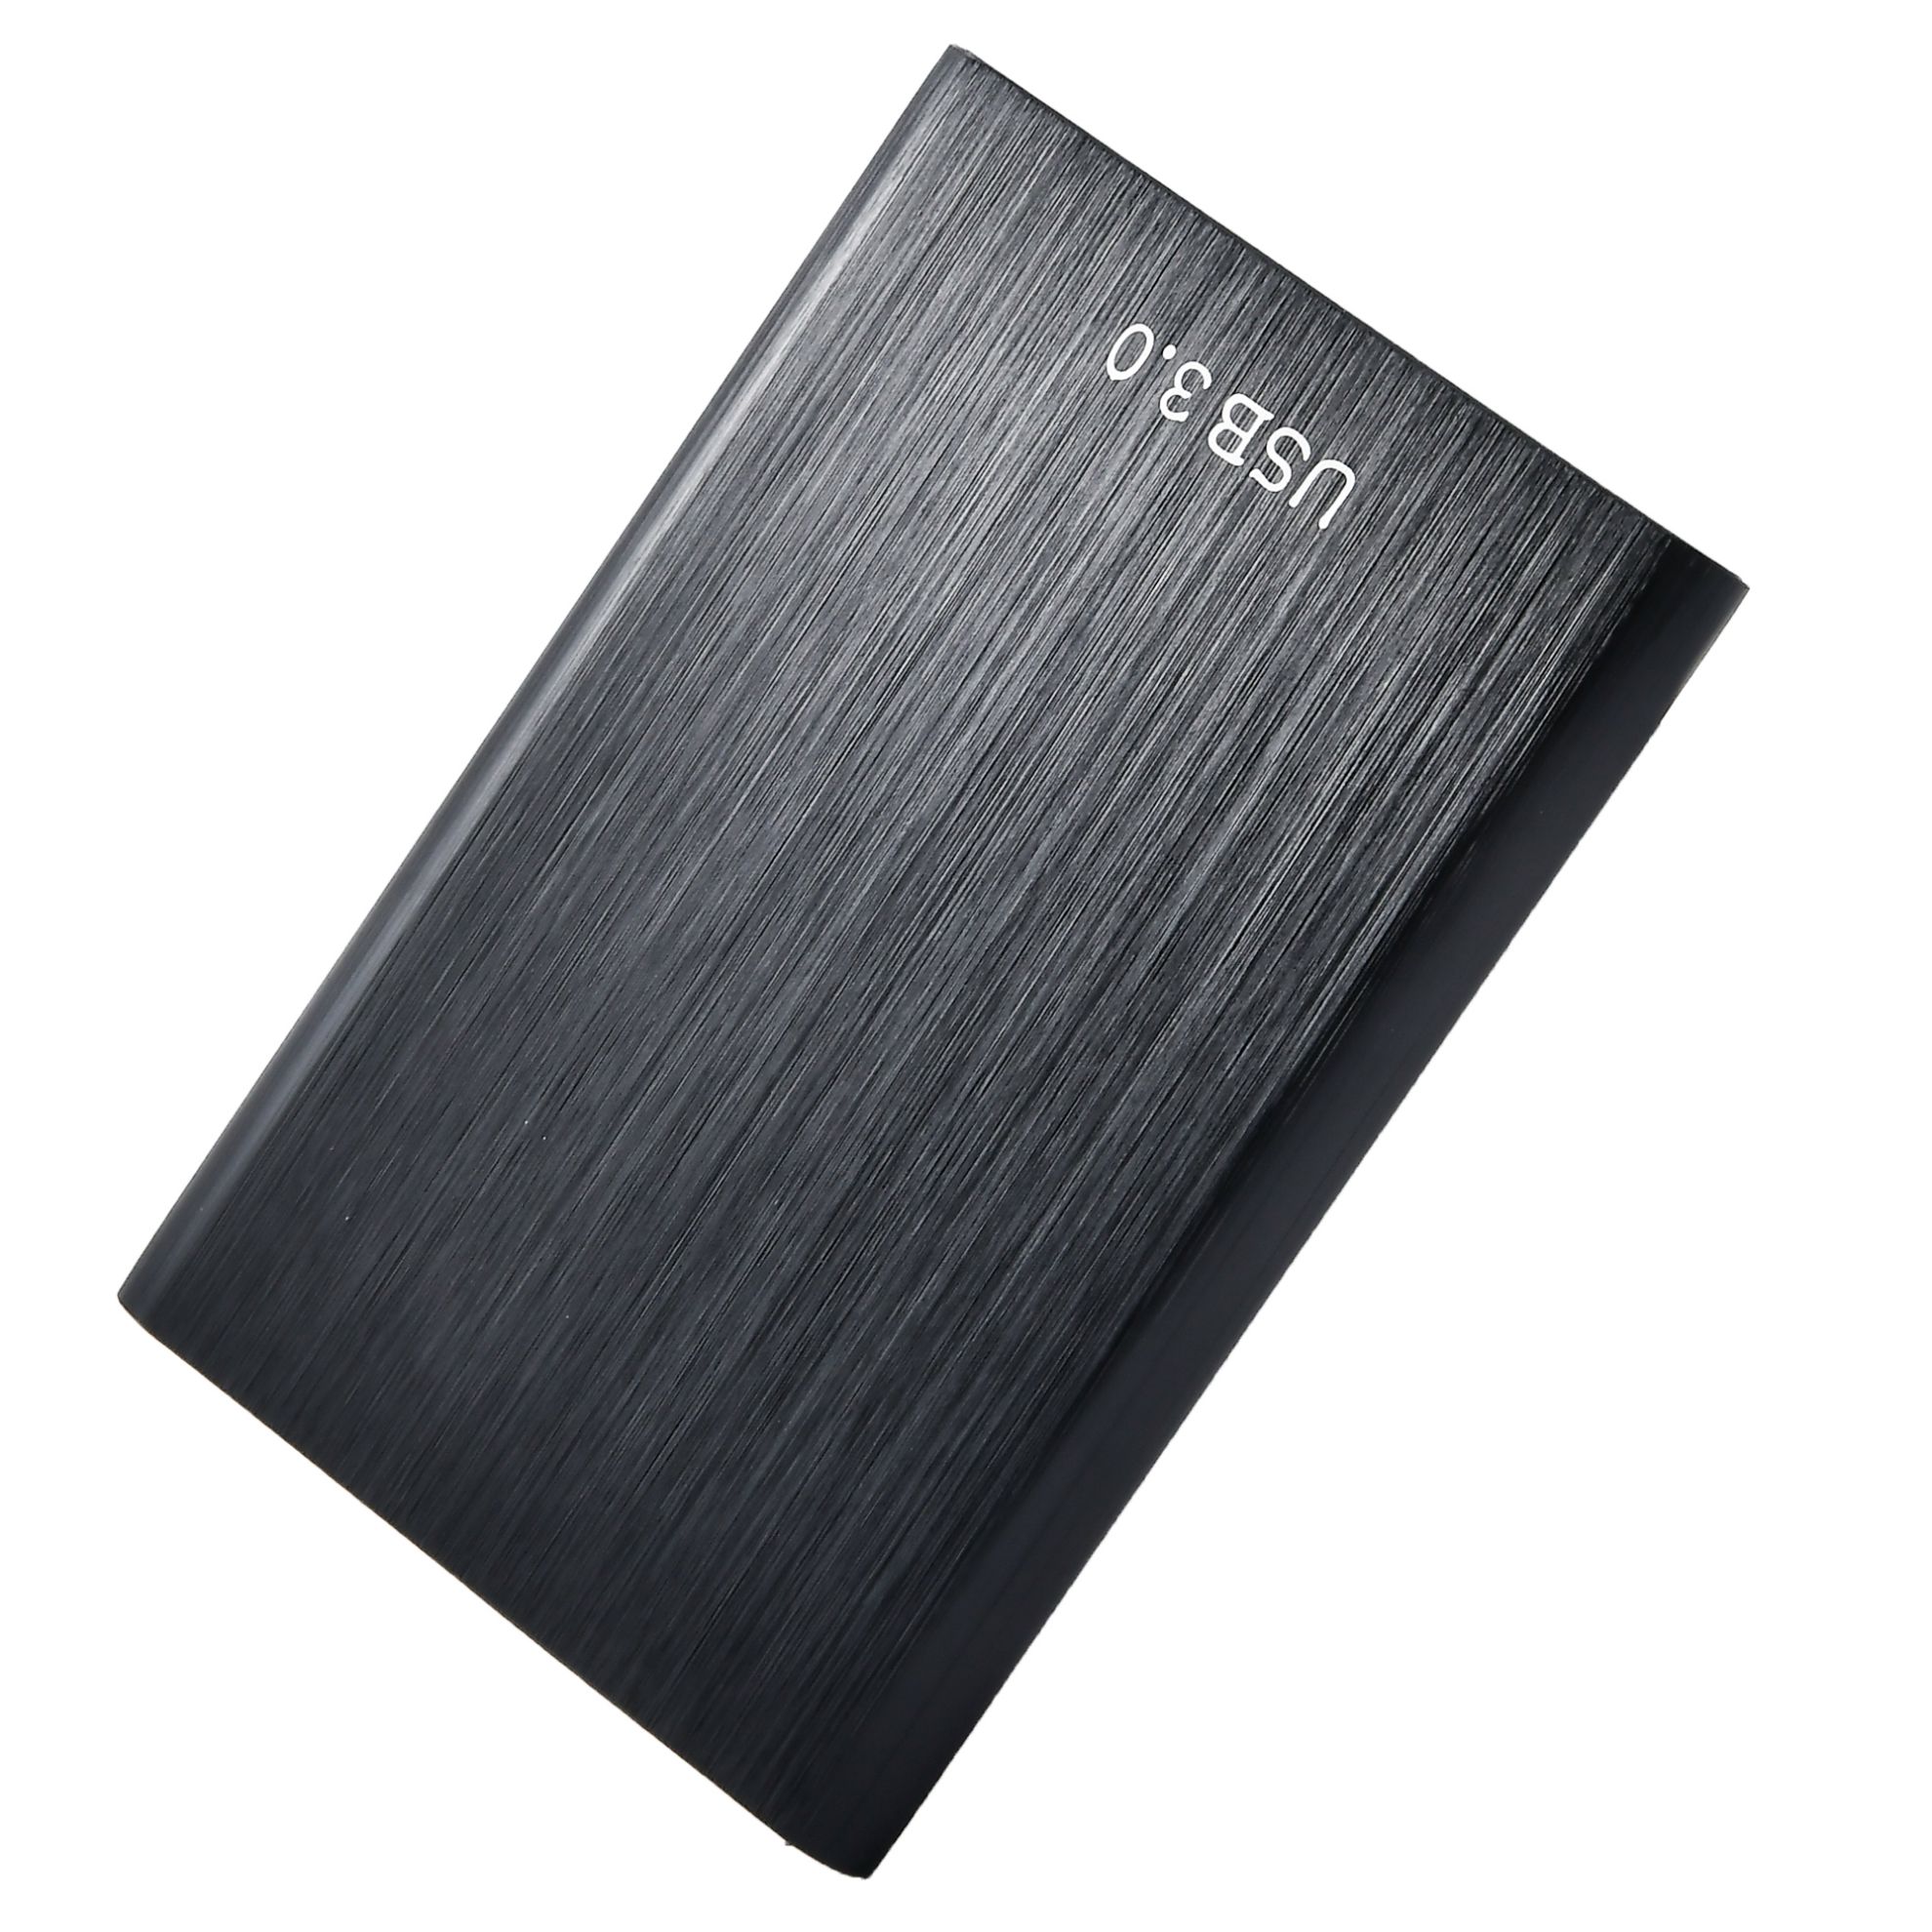 2TB External Hard Drive Portable Solid State External HHD High Speed USB 3.1 Compatible with PC, Laptop and Mac